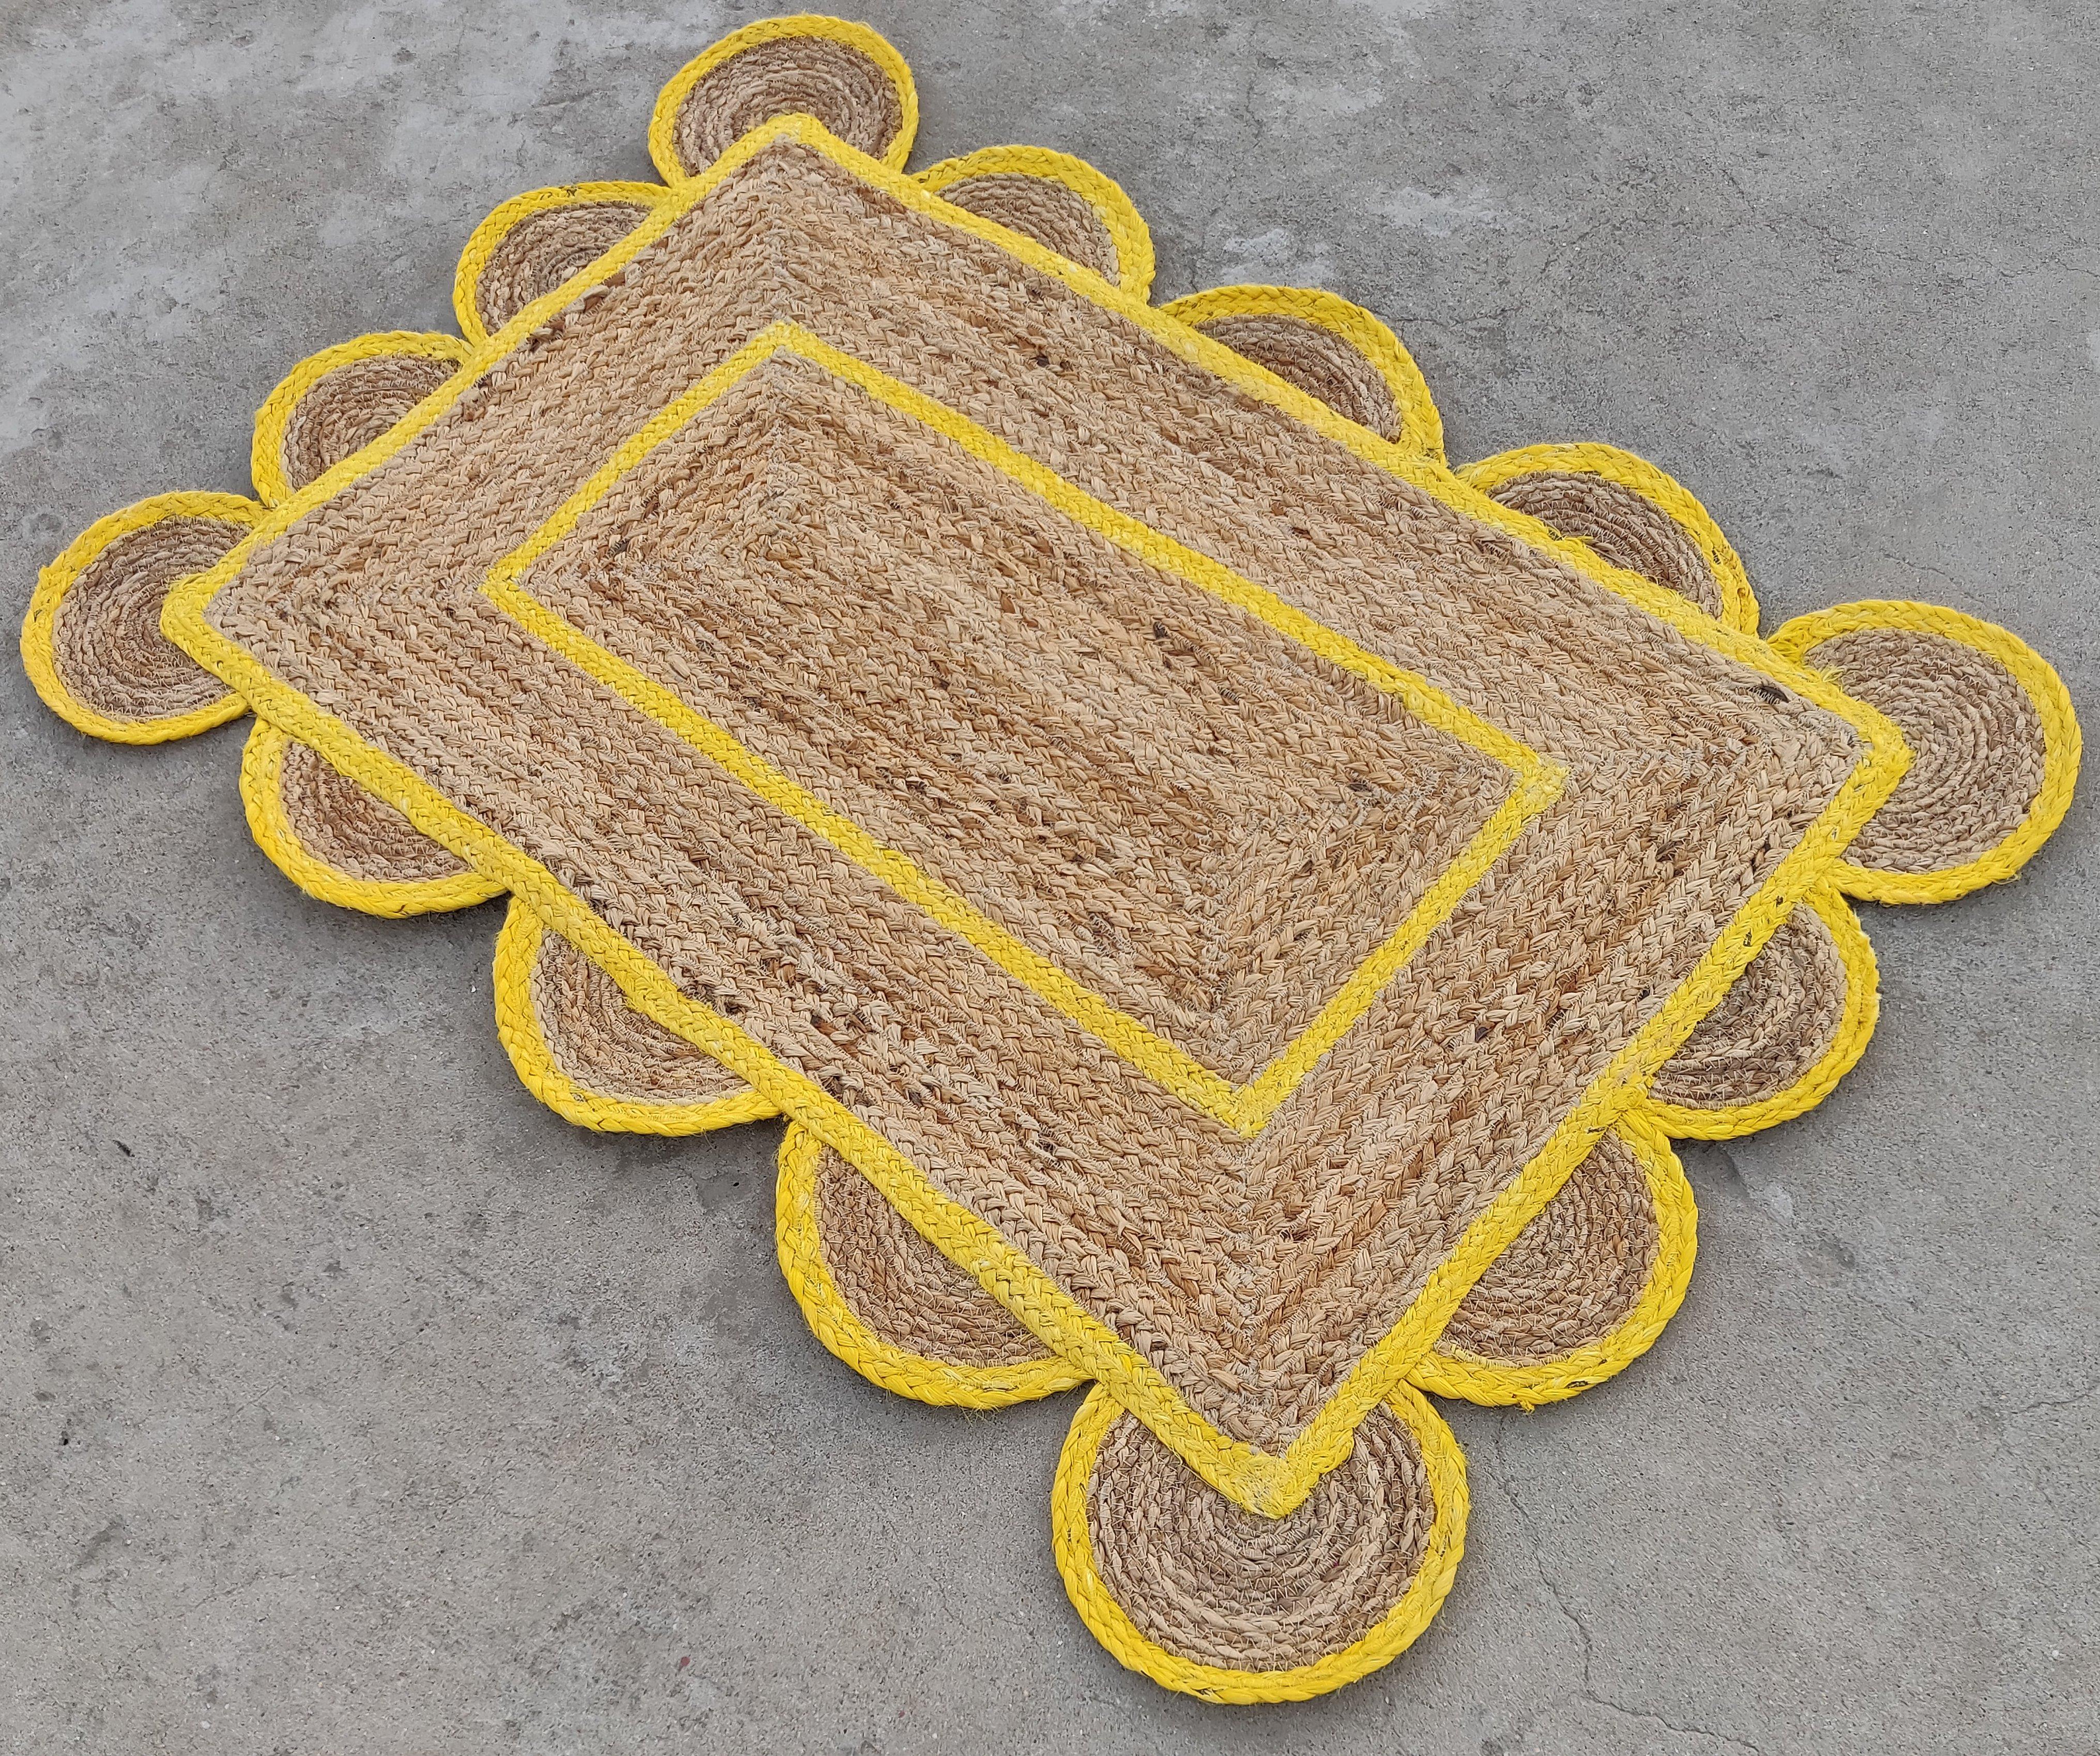 Handmade Jute Scalloped Rug, Natural Jute Dhurrie with Yellow Border -2'x3'

These special flat-weave dhurries are hand-woven with 15 ply 100% cotton yarn. Due to the special manufacturing techniques used to create our rugs, the size and color of